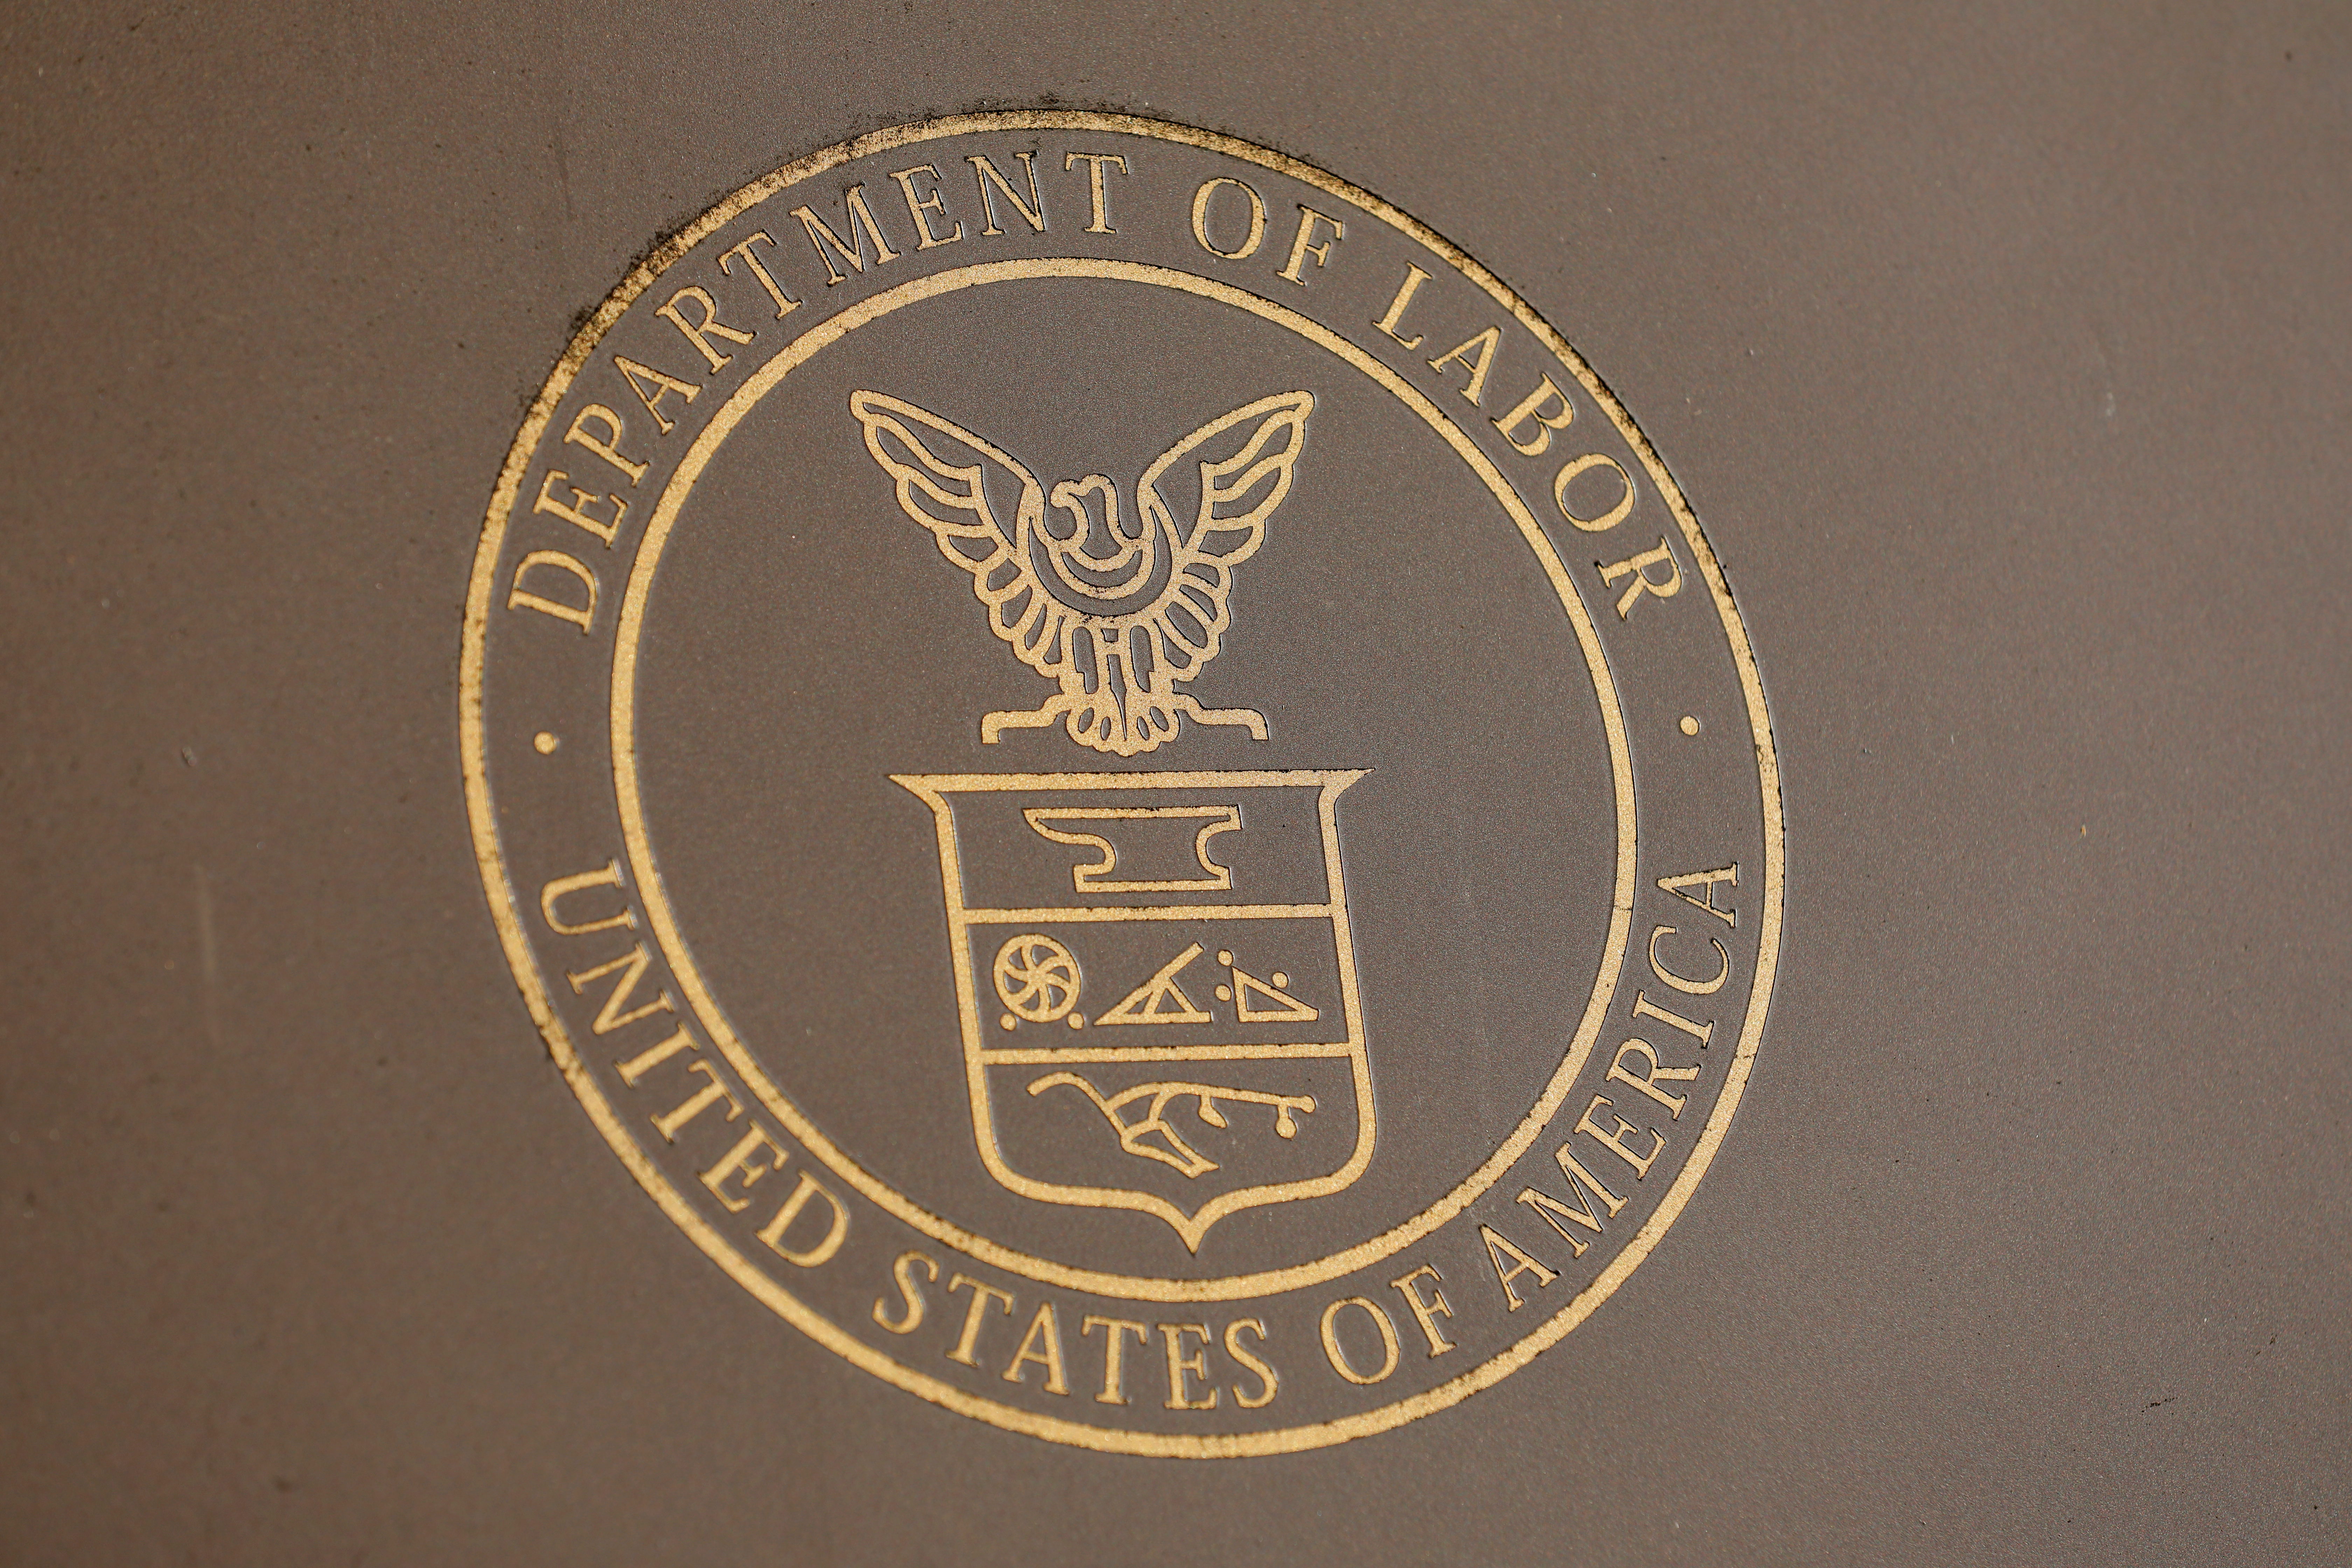 Signage is seen at the United States Department of Labor headquarters in Washington, D.C.